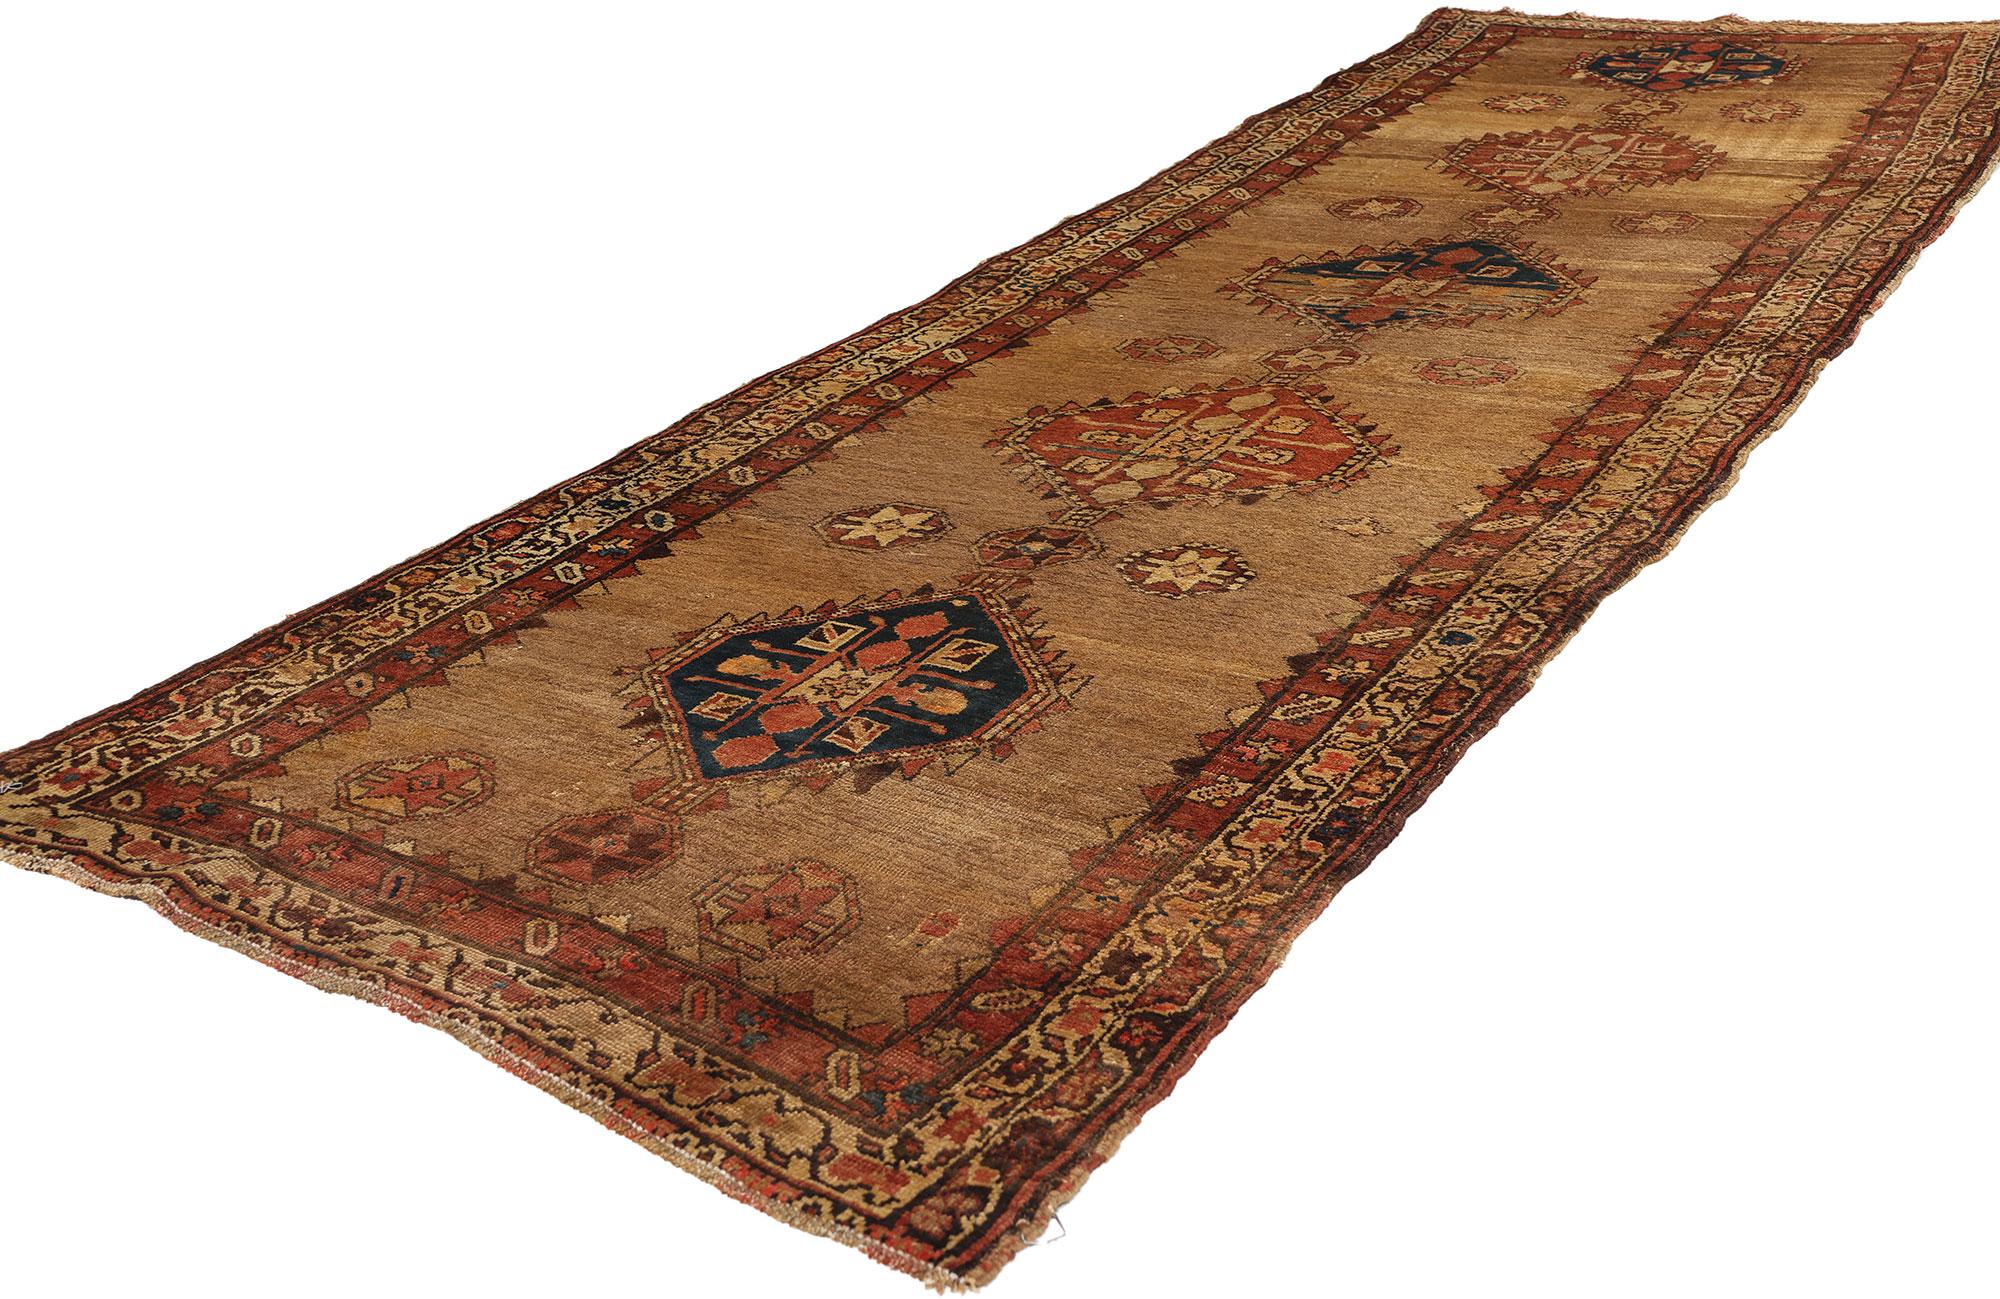 72514 Antique Brown Persian Malayer Rug Runner, 03’01 x 10’06. Hailing from the western Iranian region of Malayer, Persian Malayer carpet runners are renowned for their meticulous craftsmanship and elongated proportions, perfectly suited for